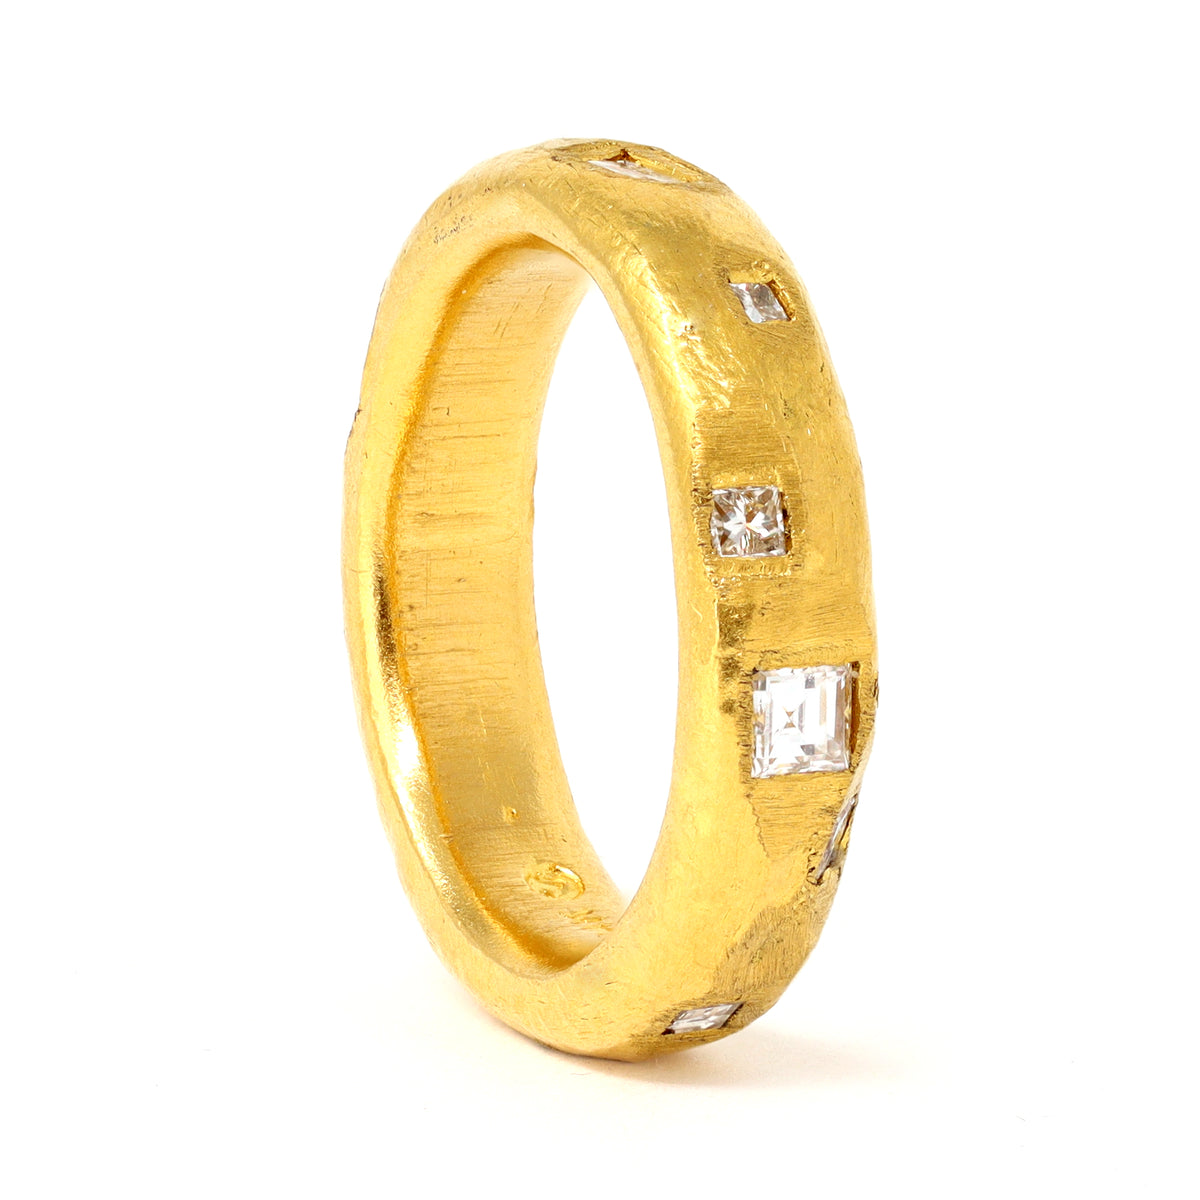 Rosaria Varra Diamond Band Ring in 24K Gold vertical view